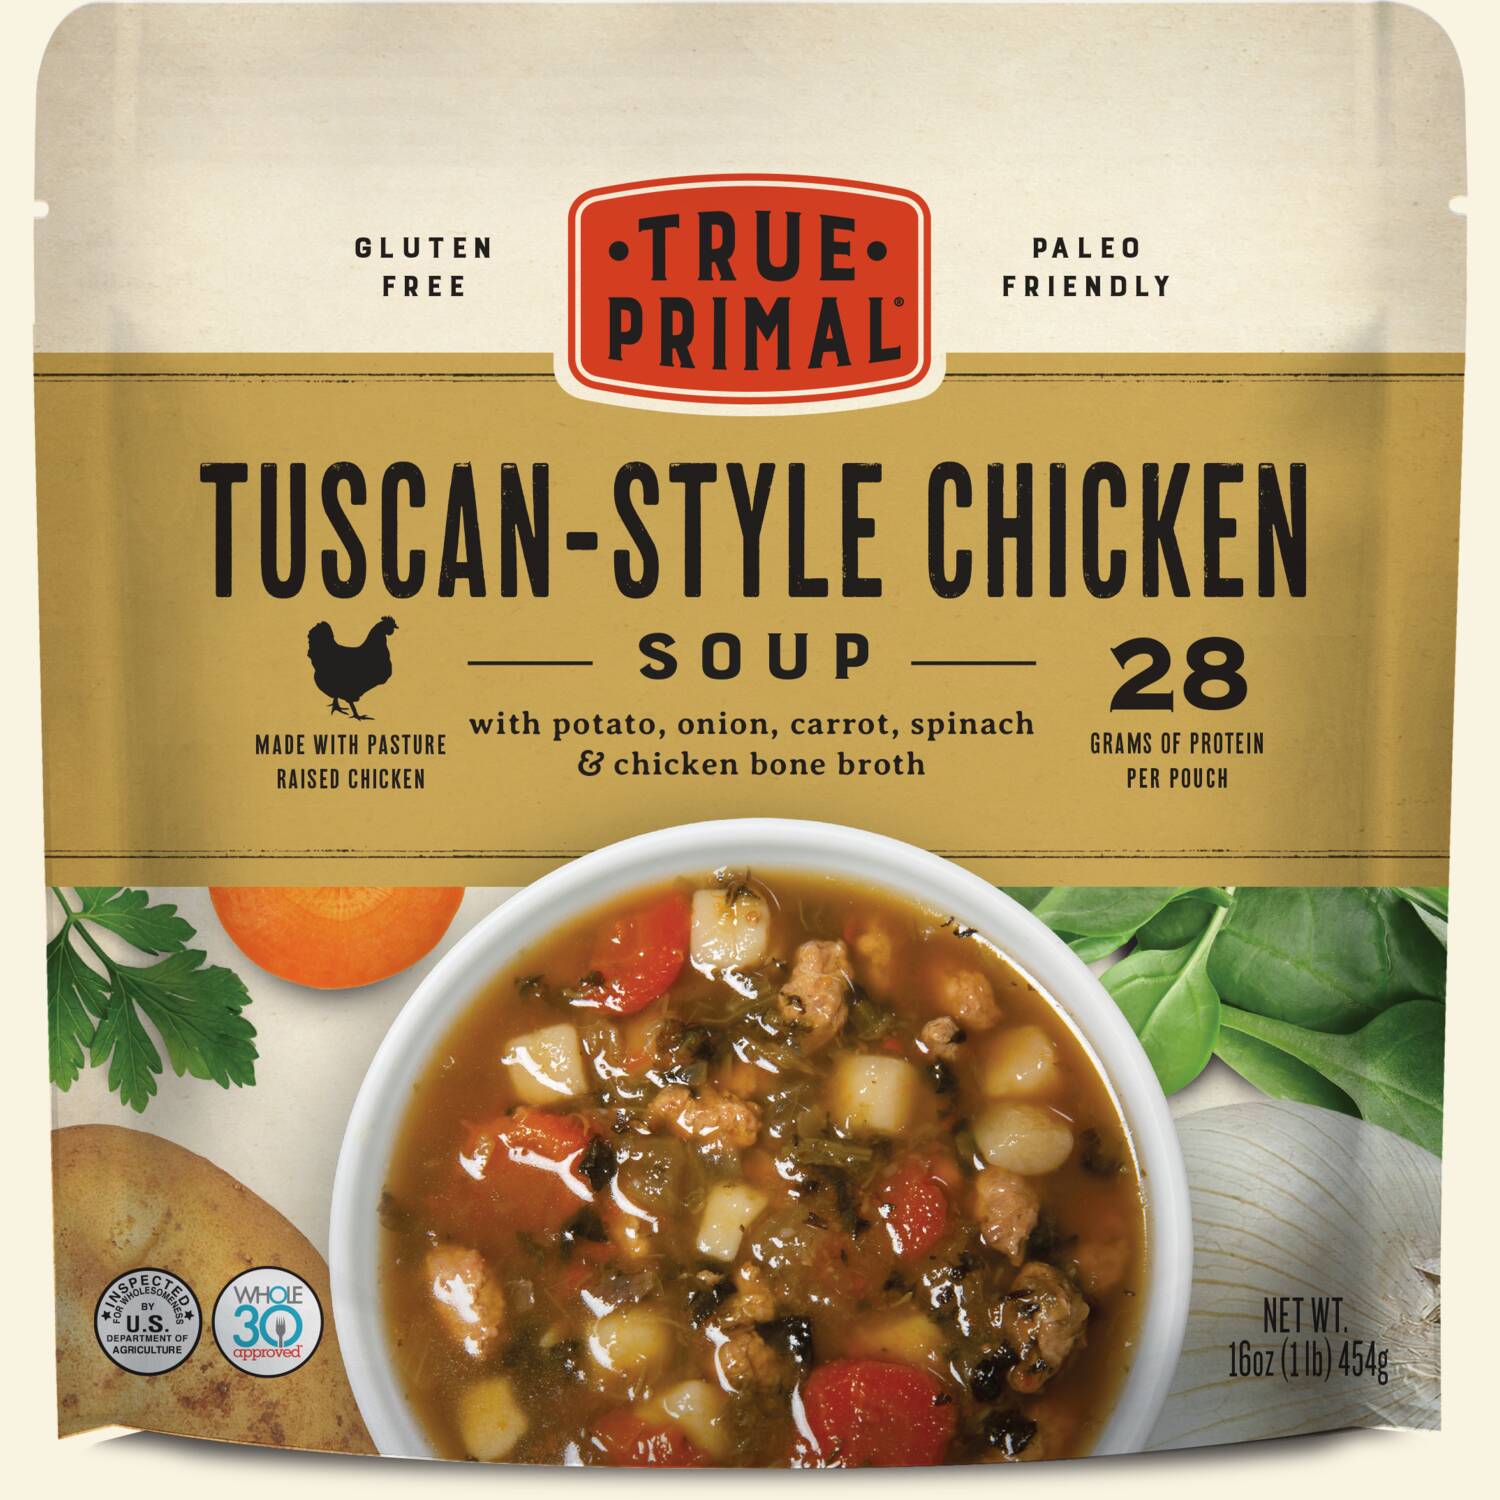 True Primal Tuscan-Style Chicken Soup in pouch, front